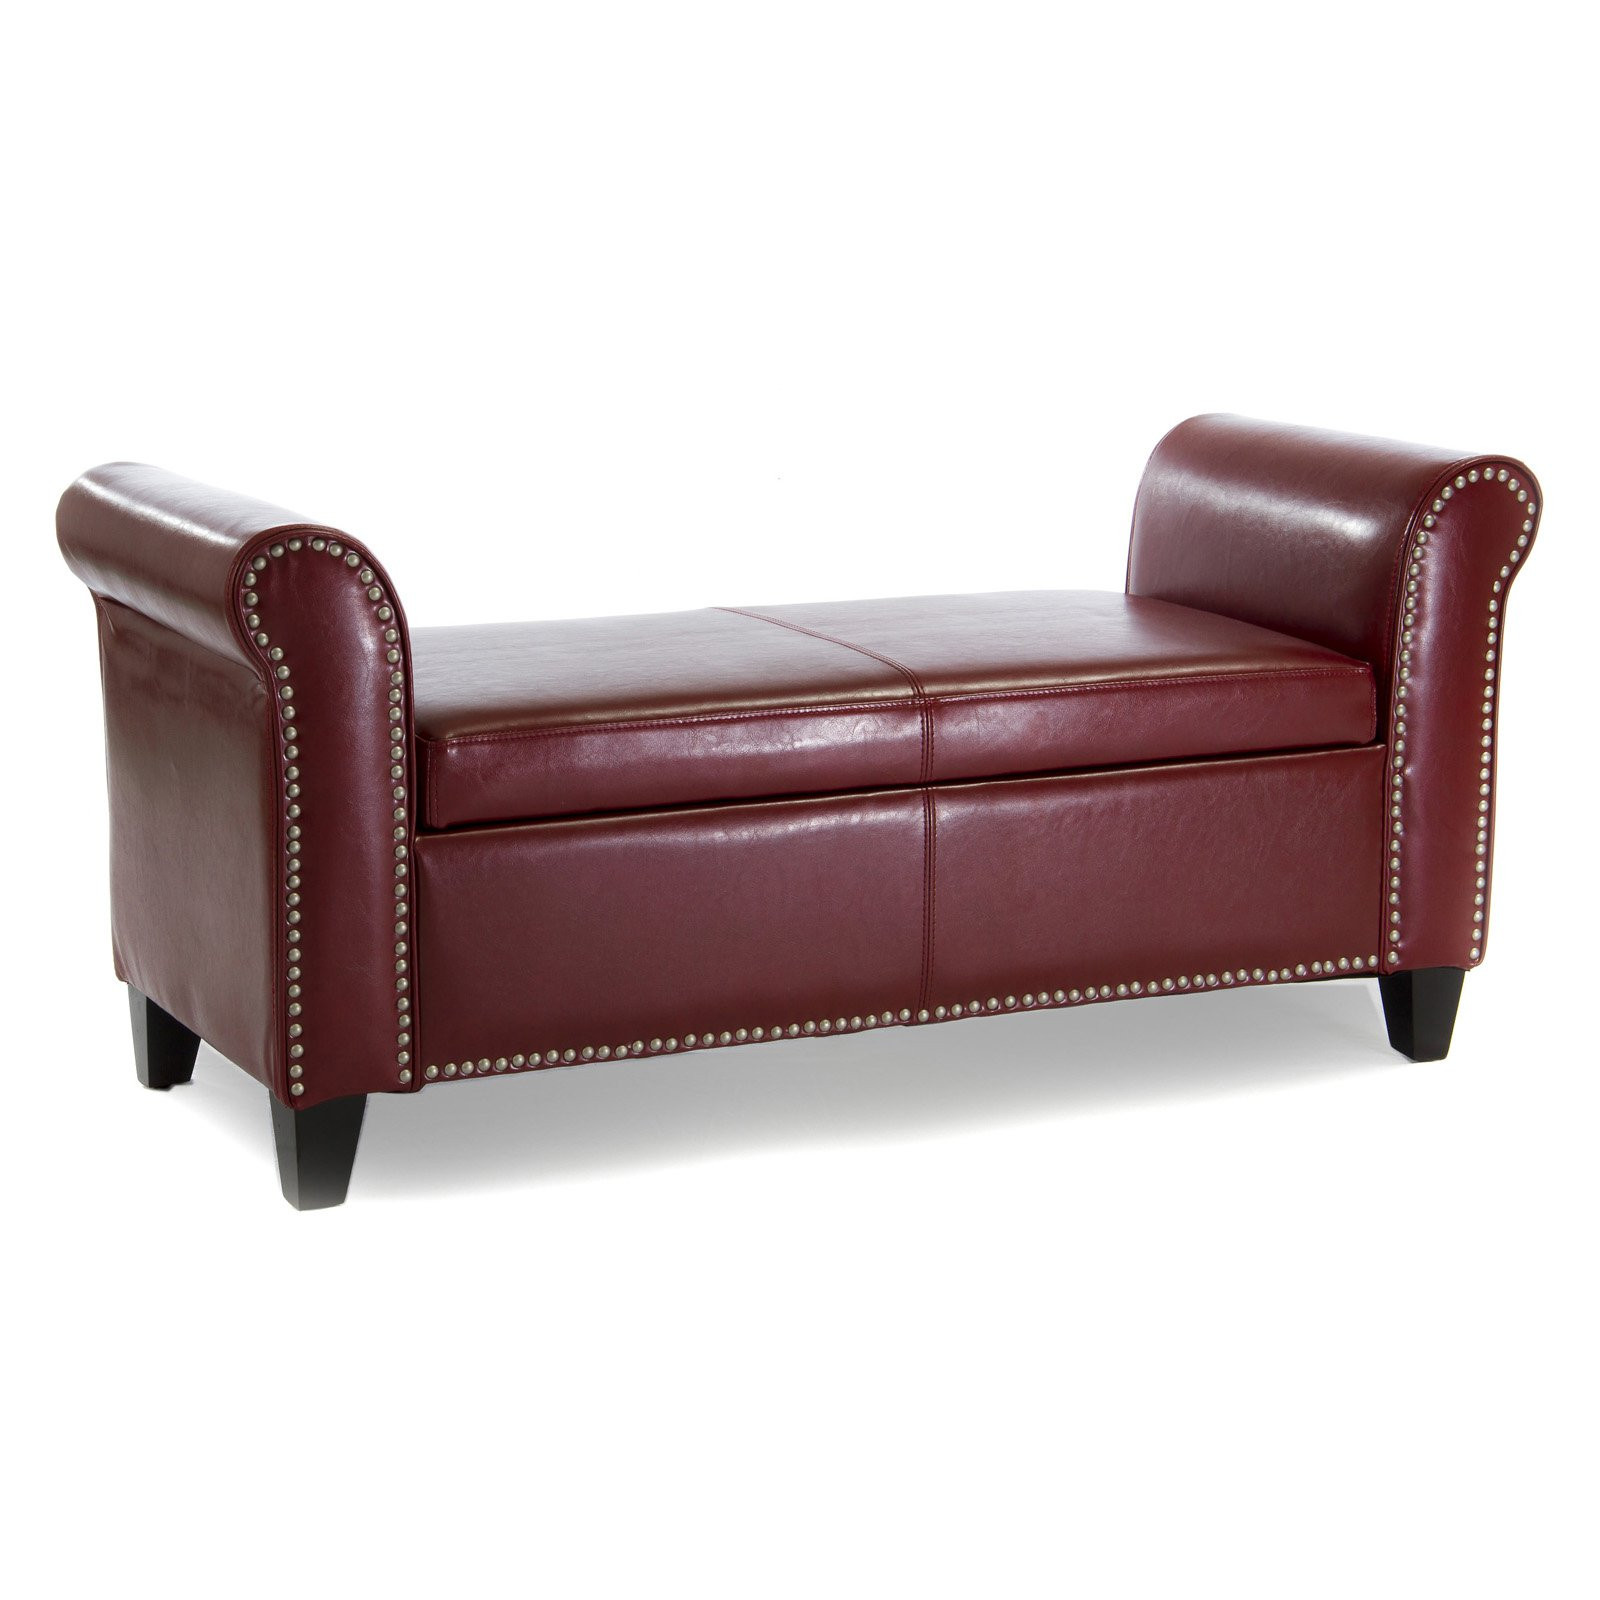 Leather Bench With Storage
 Hemmingway Red Bonded Leather Armed Storage Bench Indoor